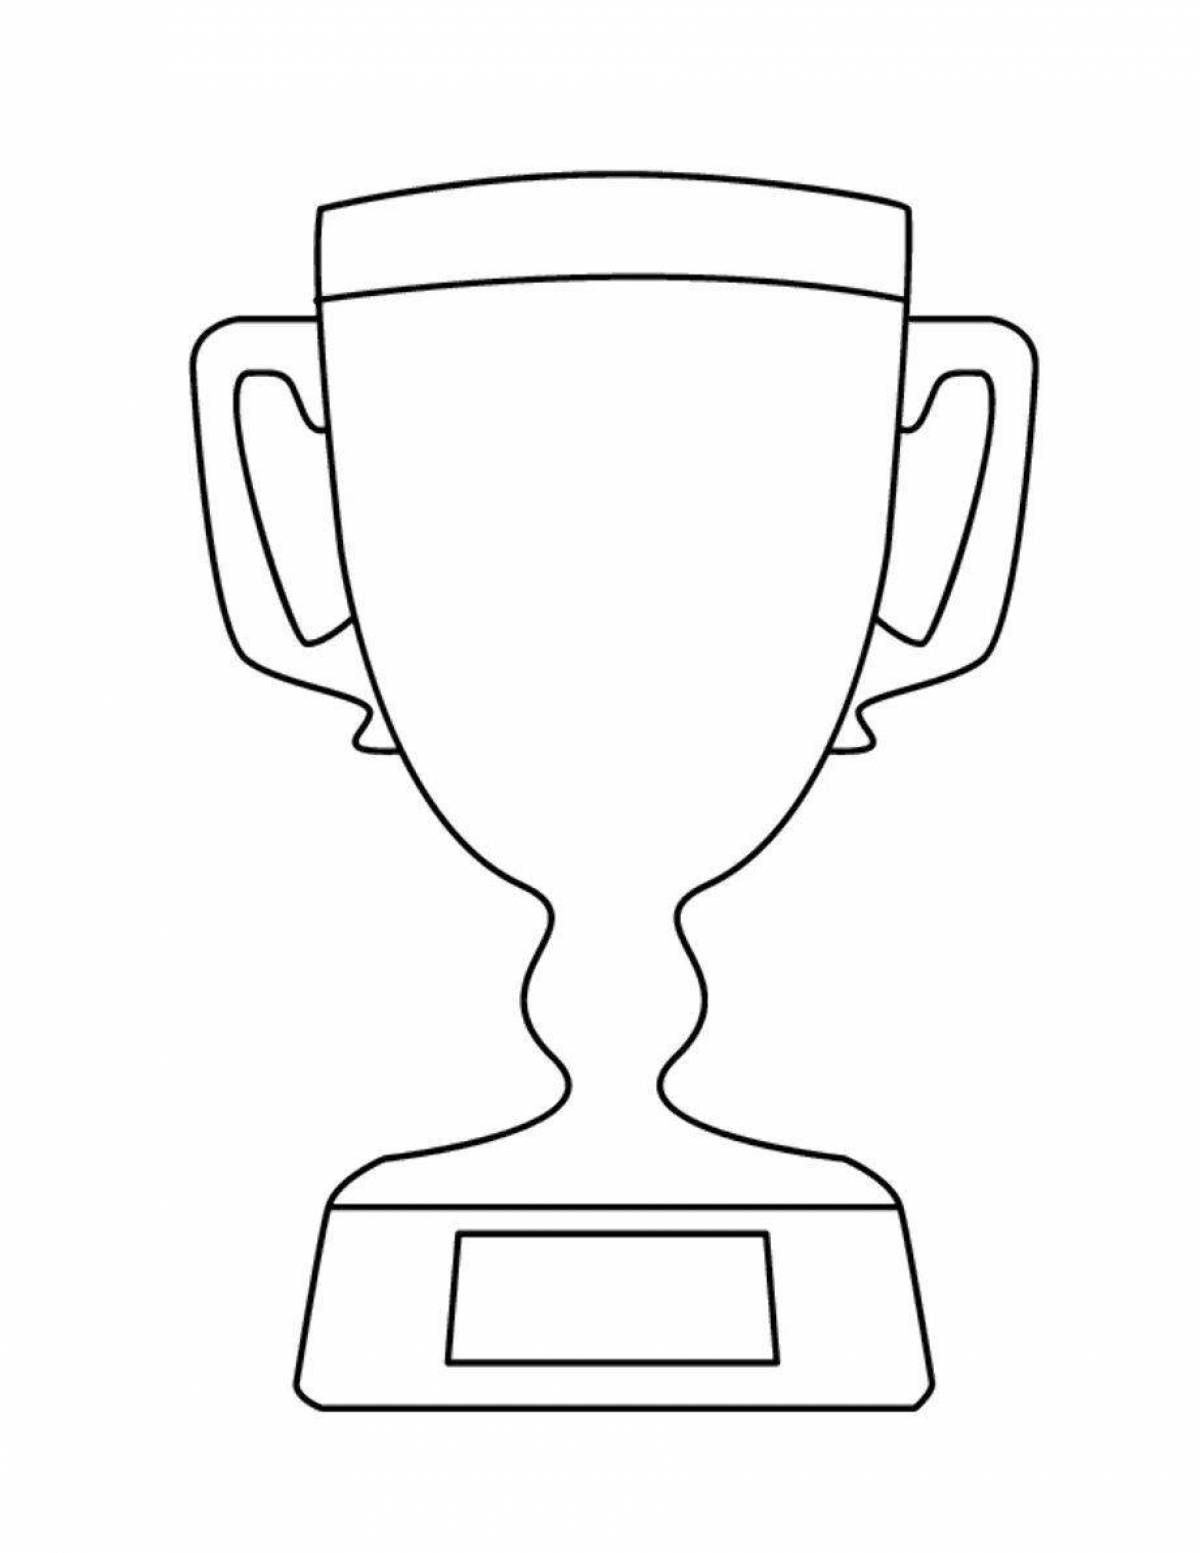 Coloring page amazing football cup